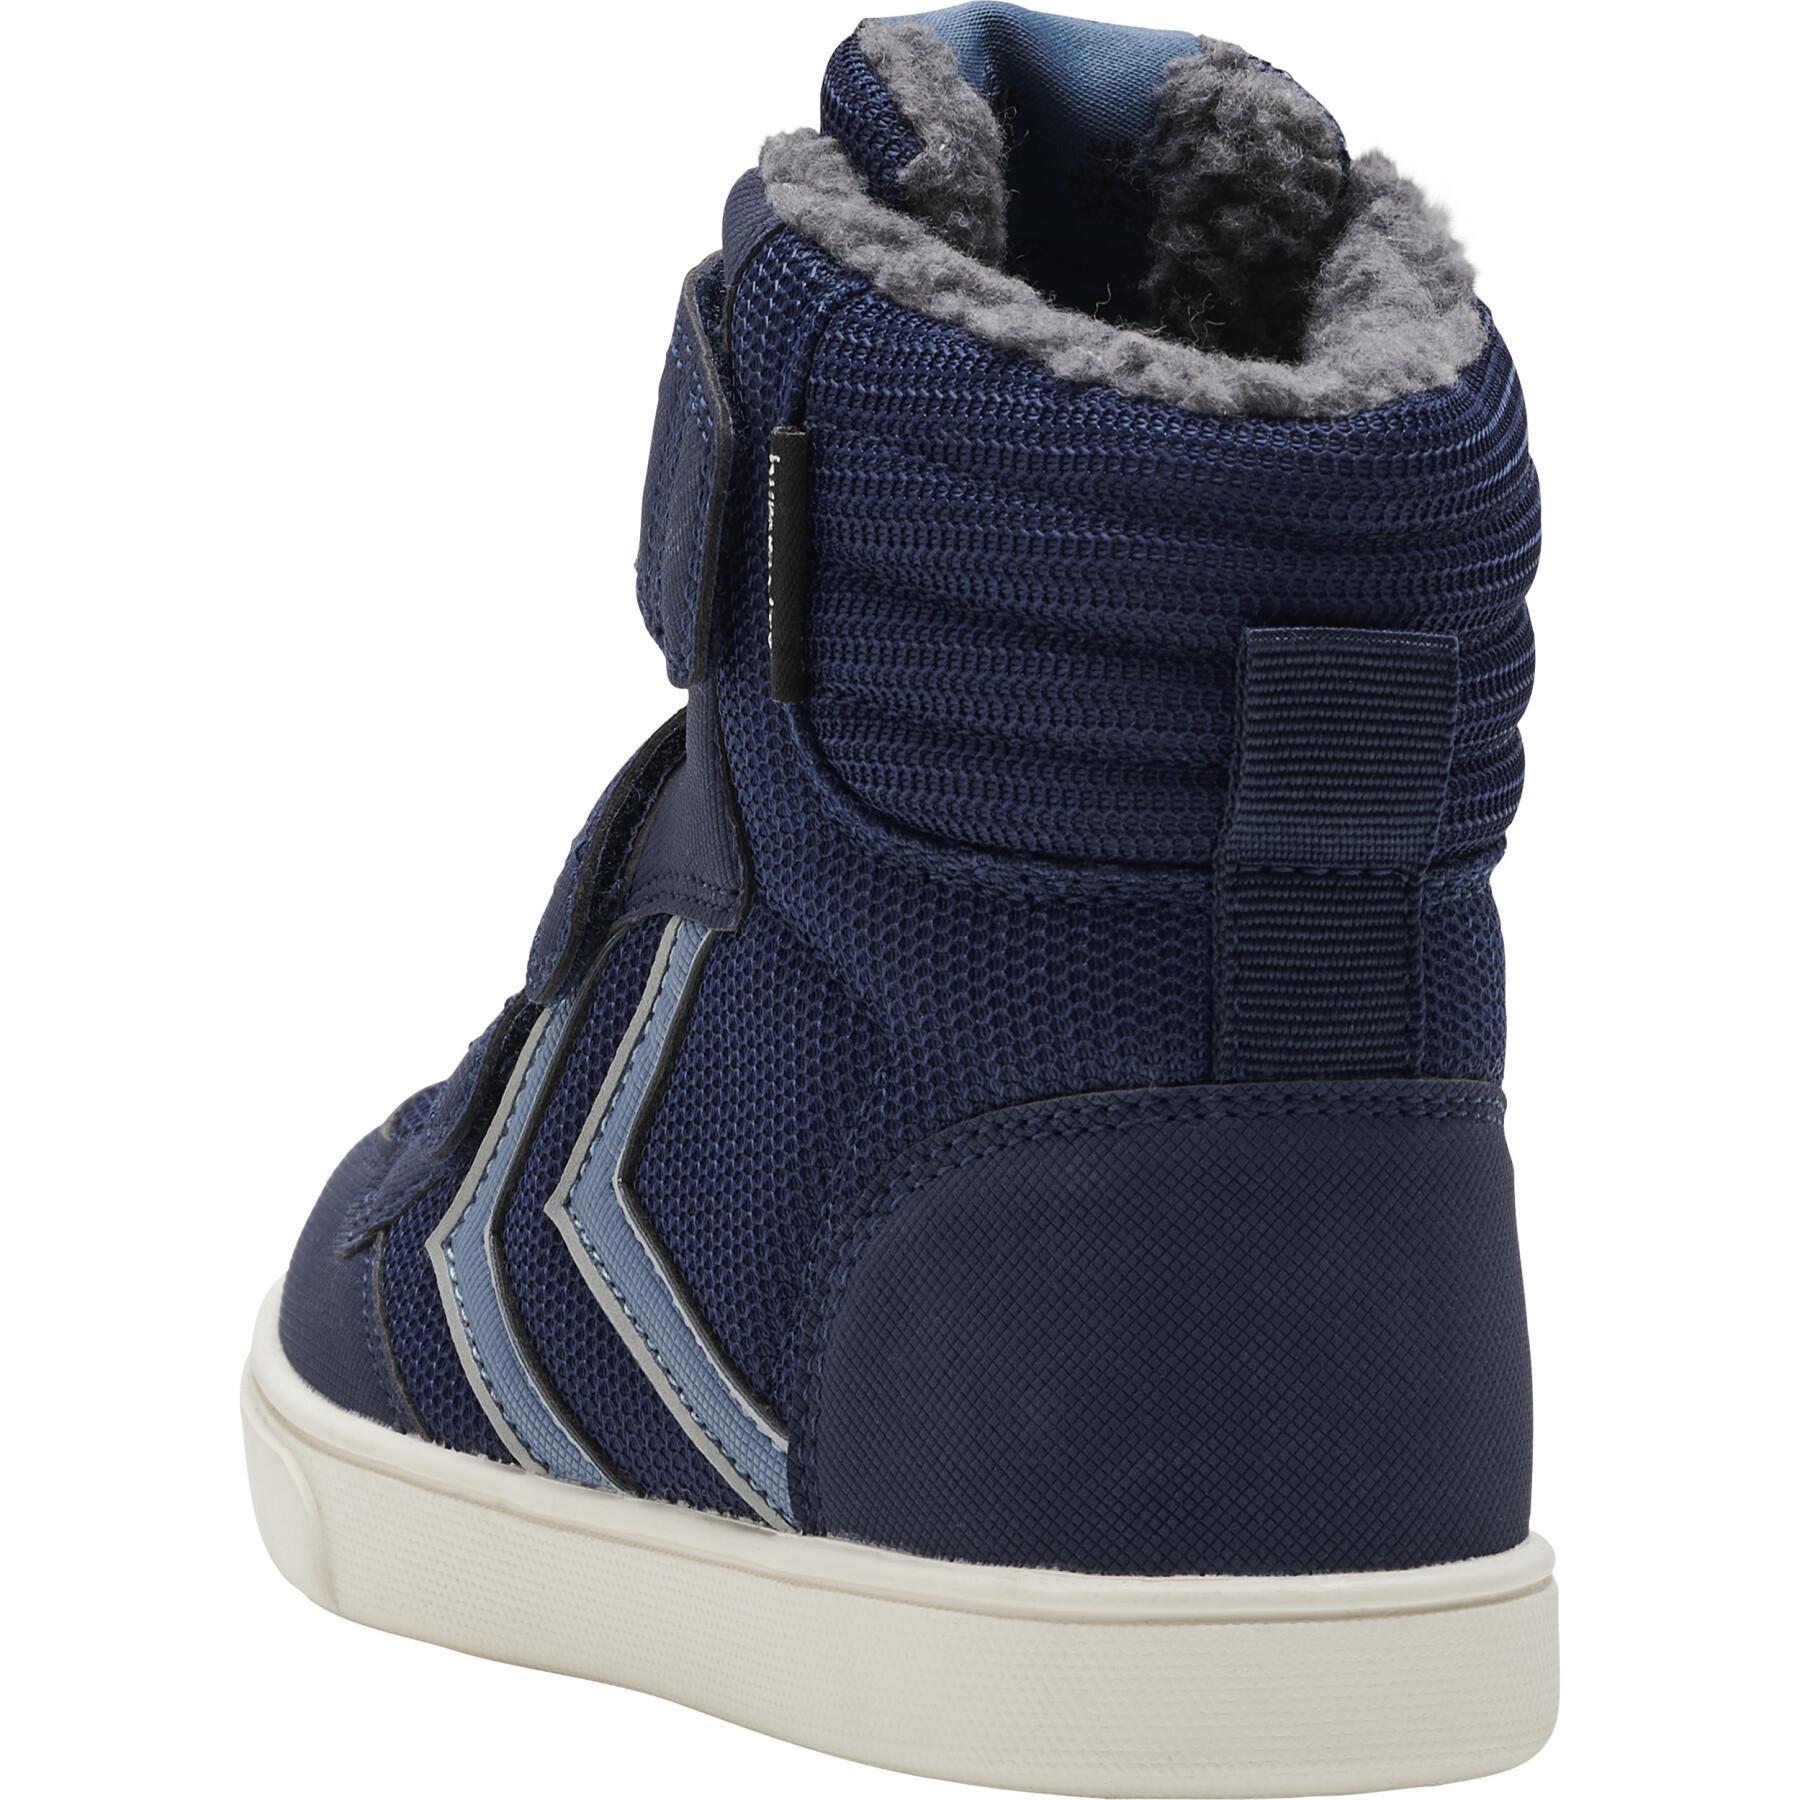 Children's sneakers Hummel Stadil Super Tex Mid Recycled